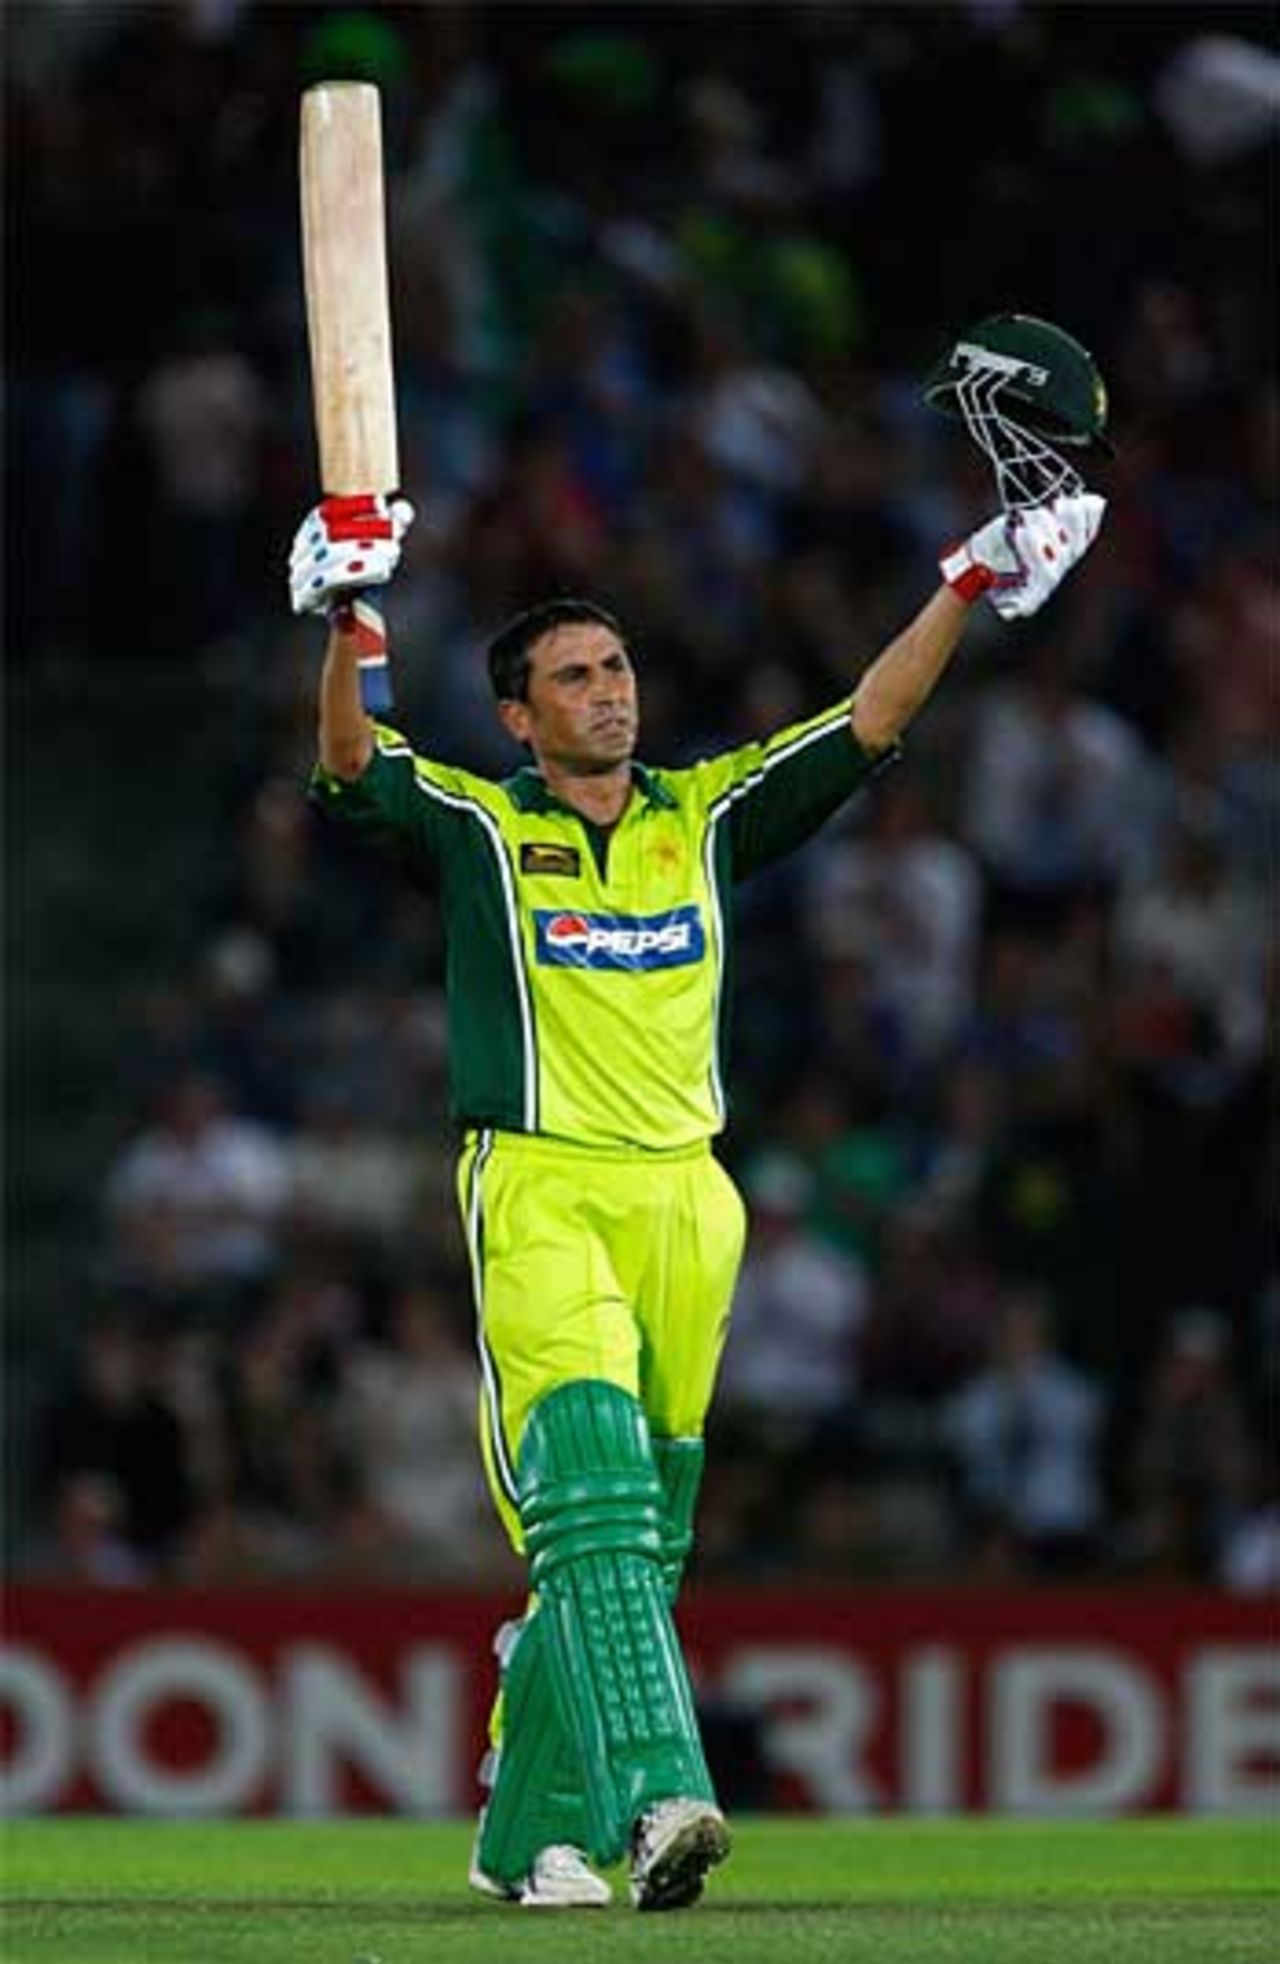 Younis Khan celebrates his match-winning century, just the second of his one-day career,  England v Pakistan, 3rd ODI, The Rose Bowl, September 5, 2006